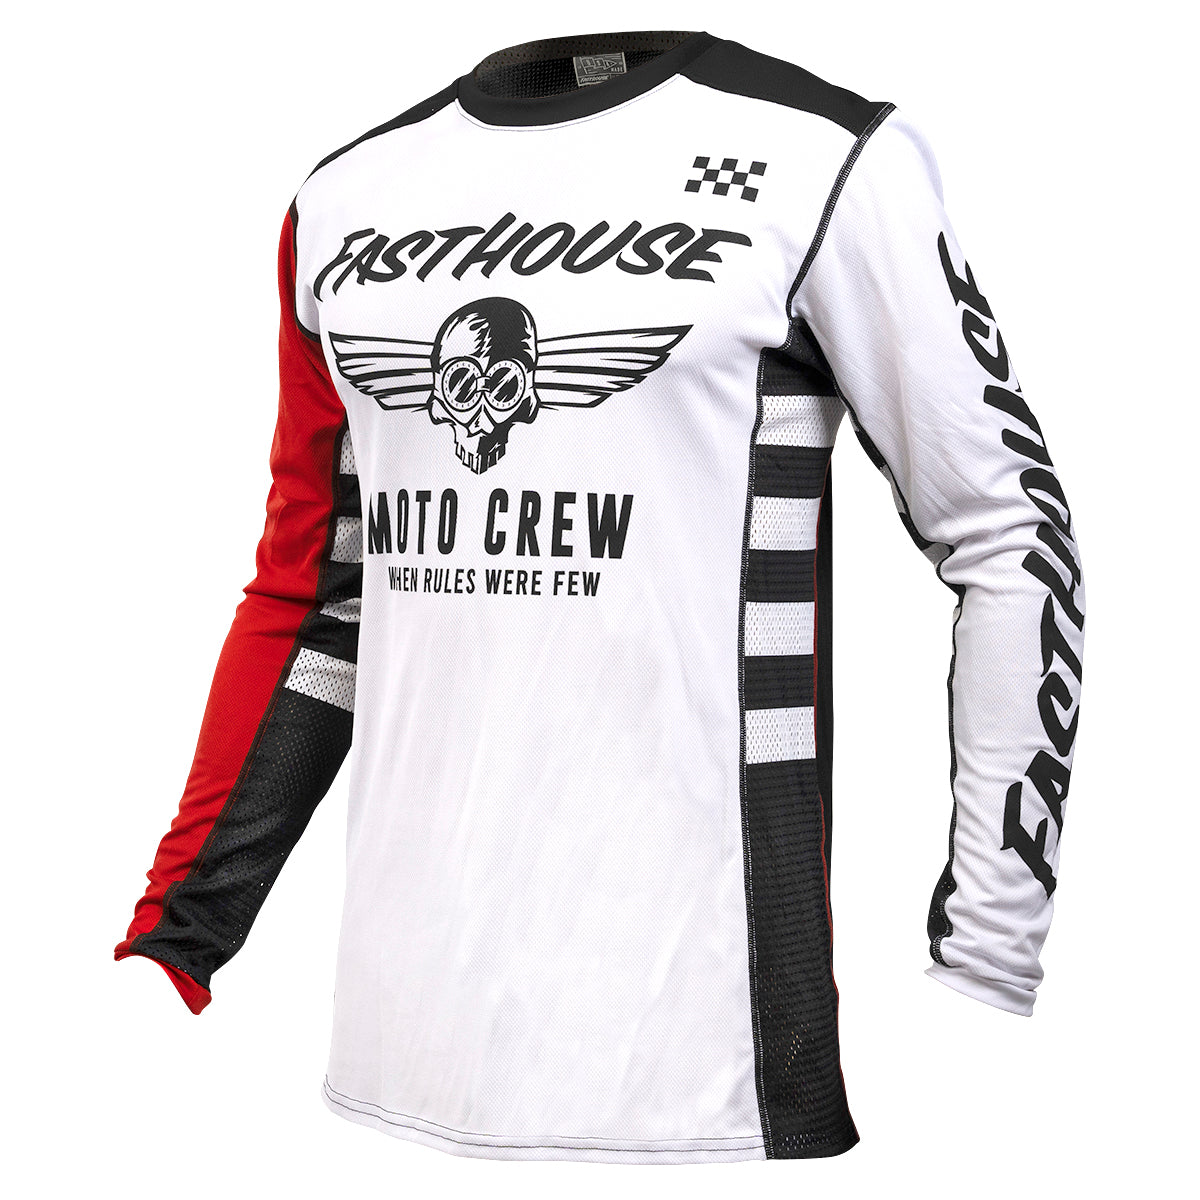 Fasthouse USA Grindhouse Factor Jersey - White/Black S